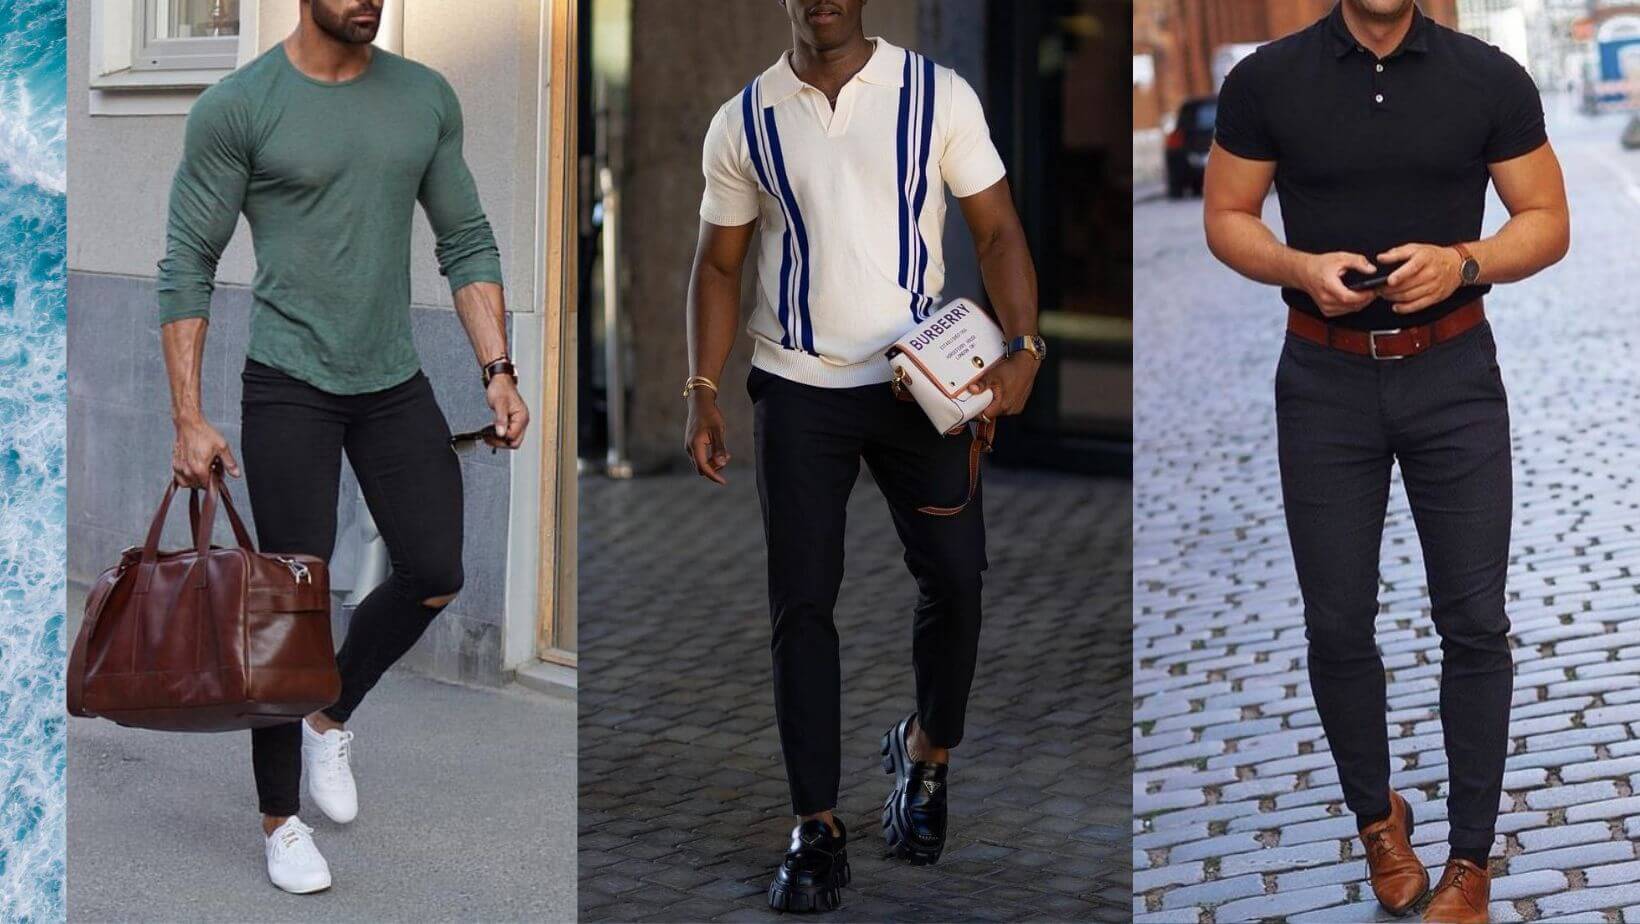 6 Essential Items for a Men's Smart Casual Dress Code/ Wardrobe